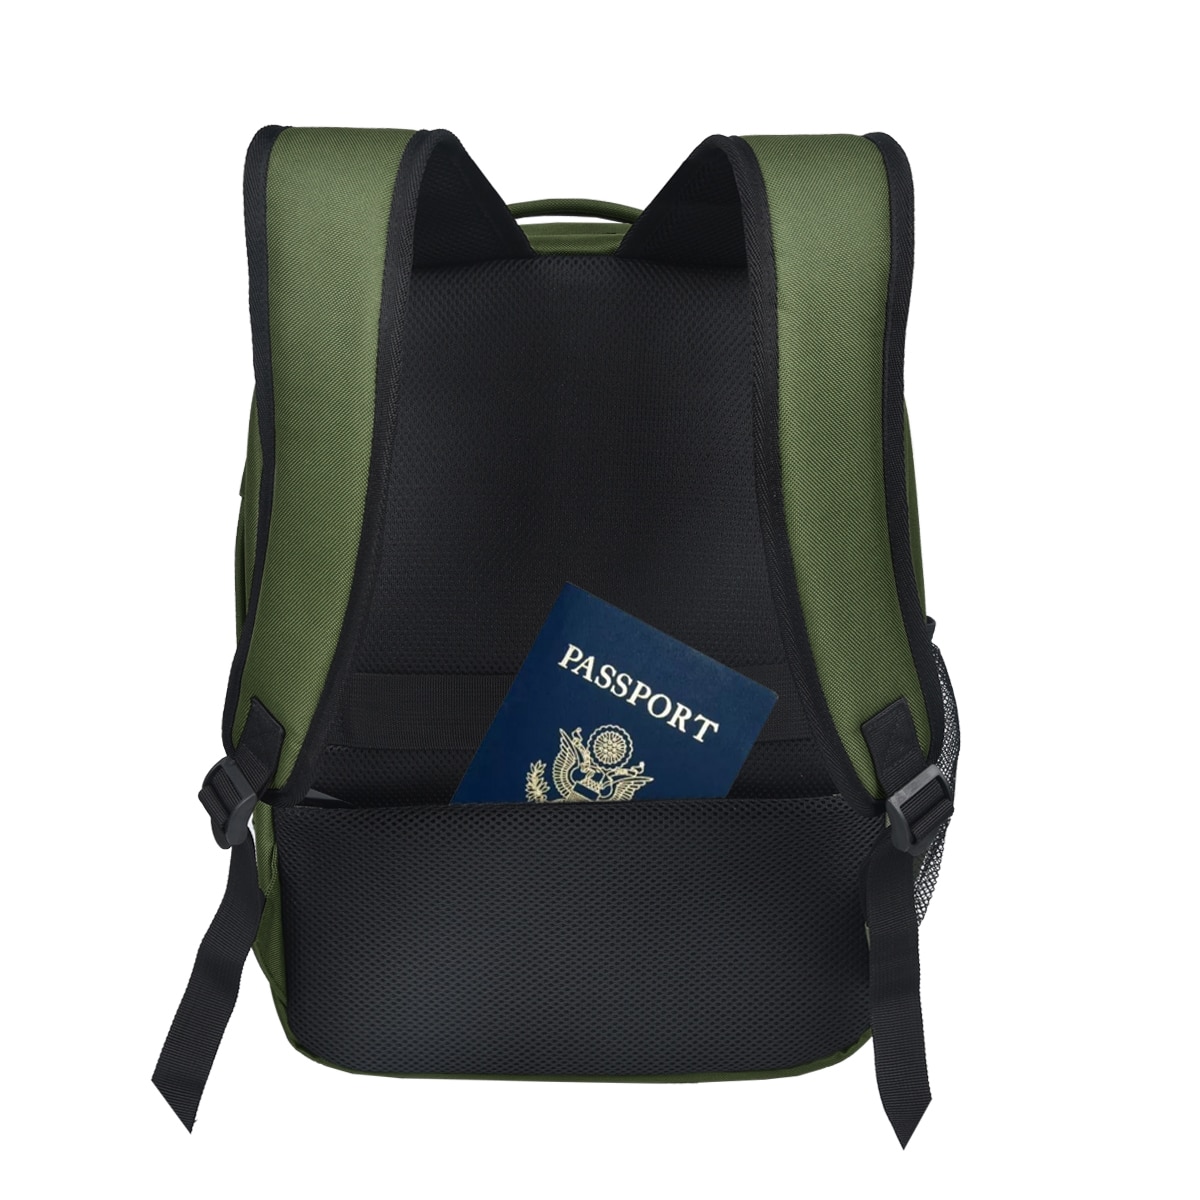 Cabinfly Pacemaker 40x30x20cm Backpack Wizzair Vueling Transavia